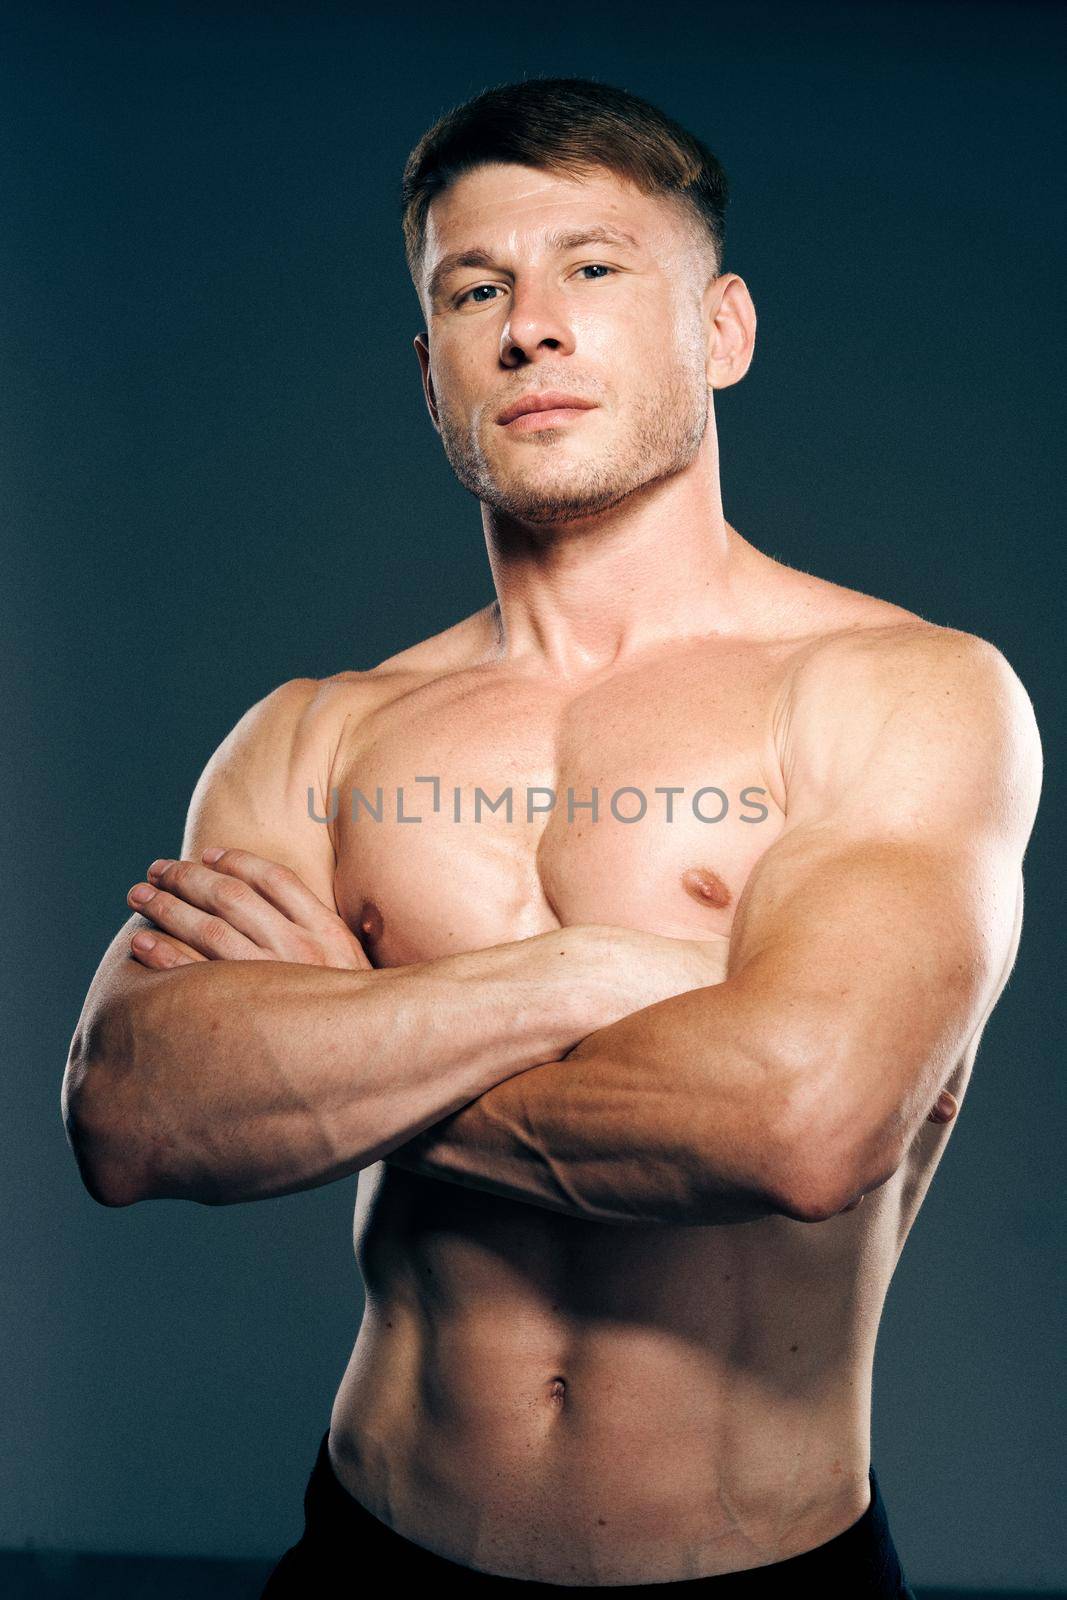 athletic male topless workout muscle bodybuilder dark background. High quality photo